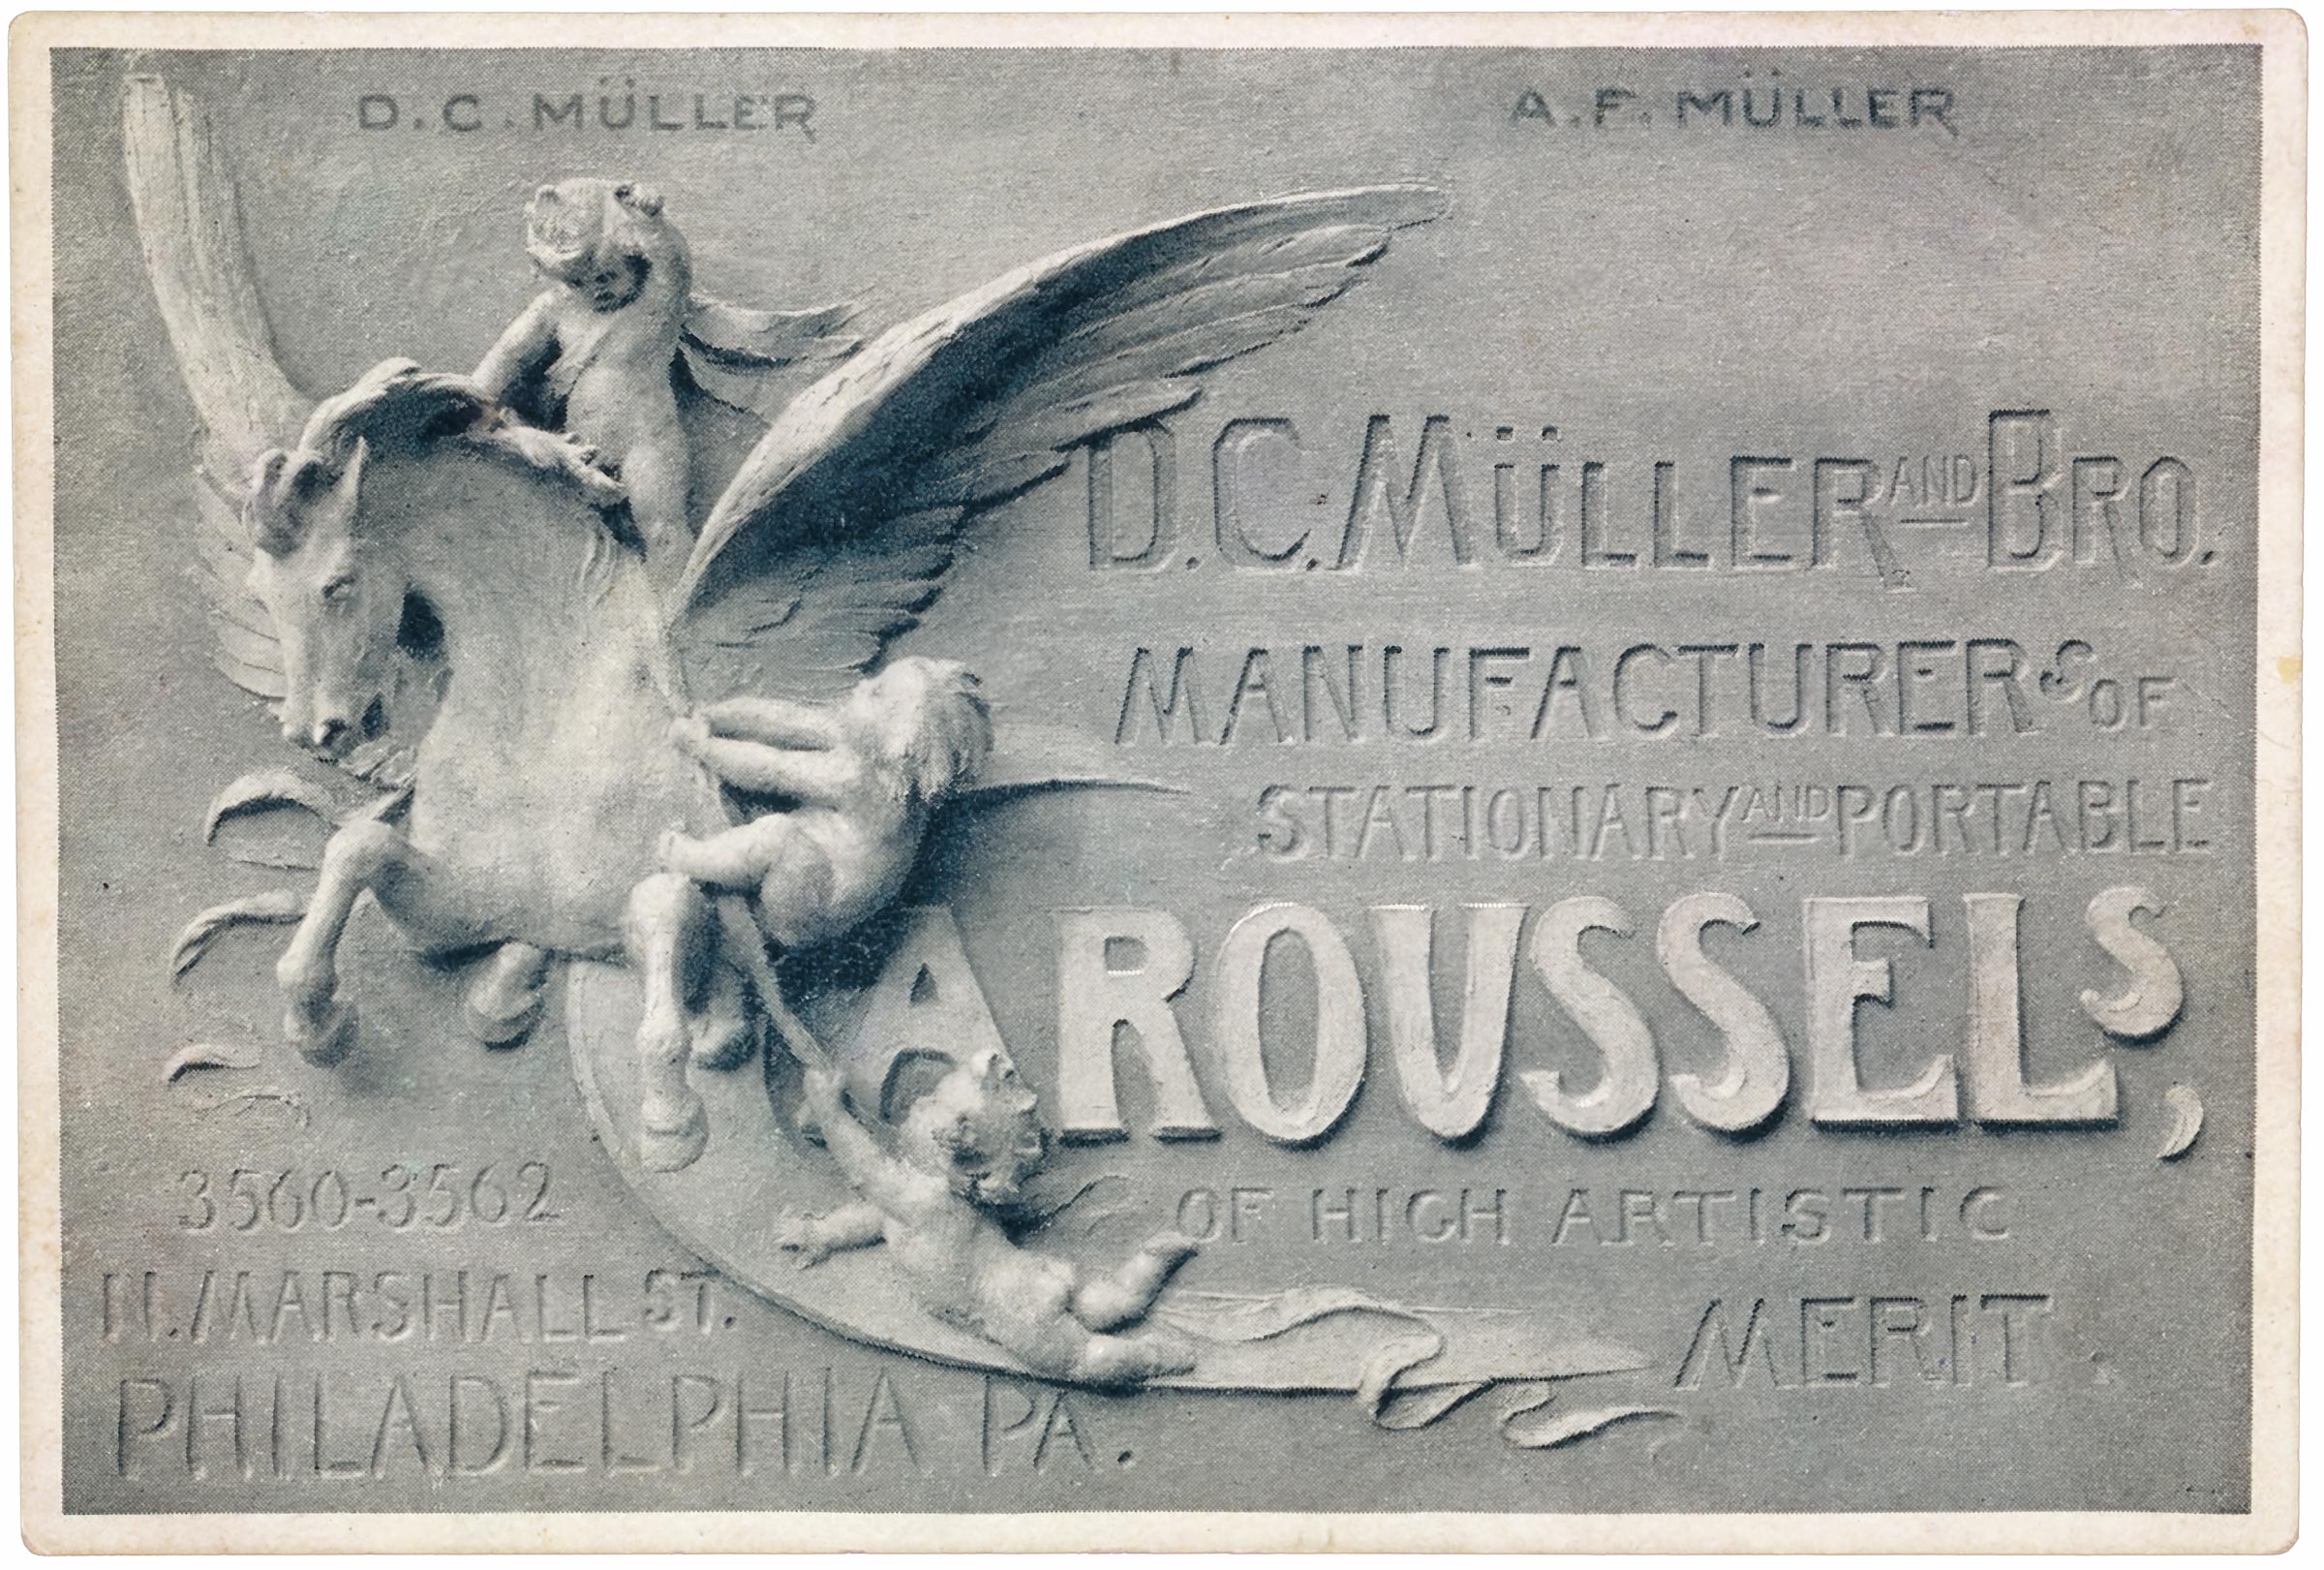 Business card for D. C. Müller & Bro.